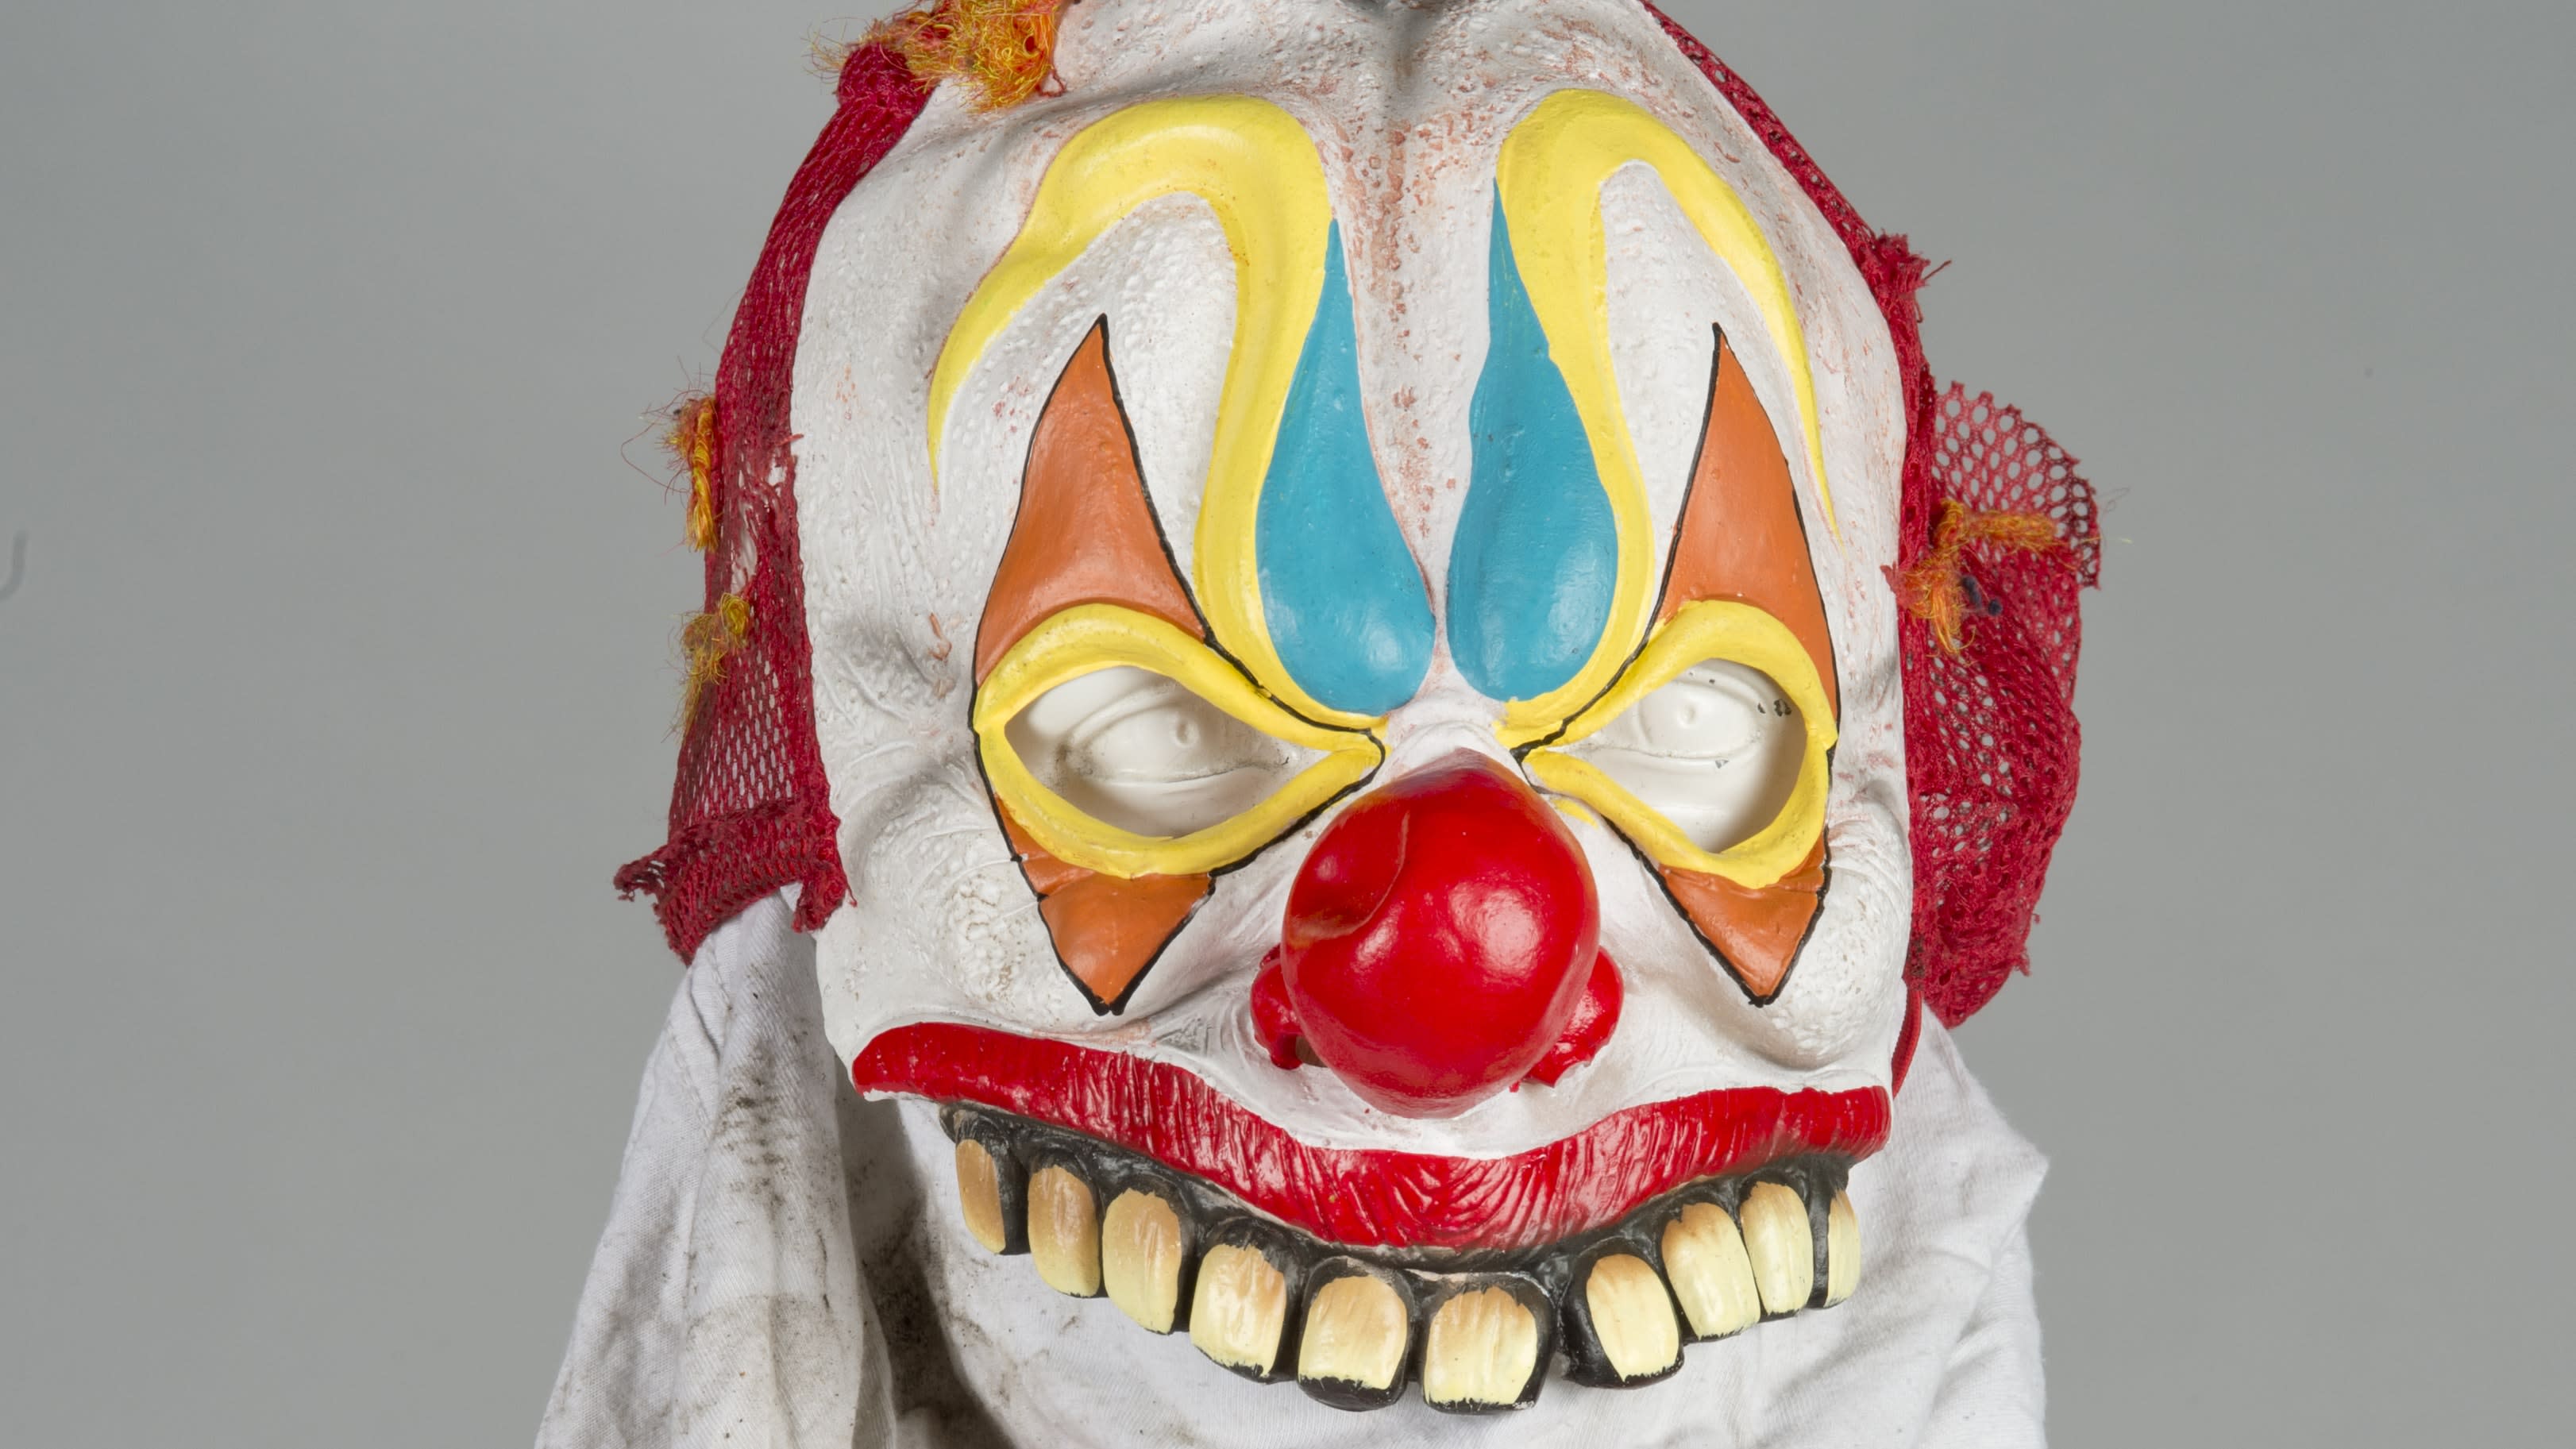 ‘Scary clown’ rapper jailed after brandishing shotgun at police